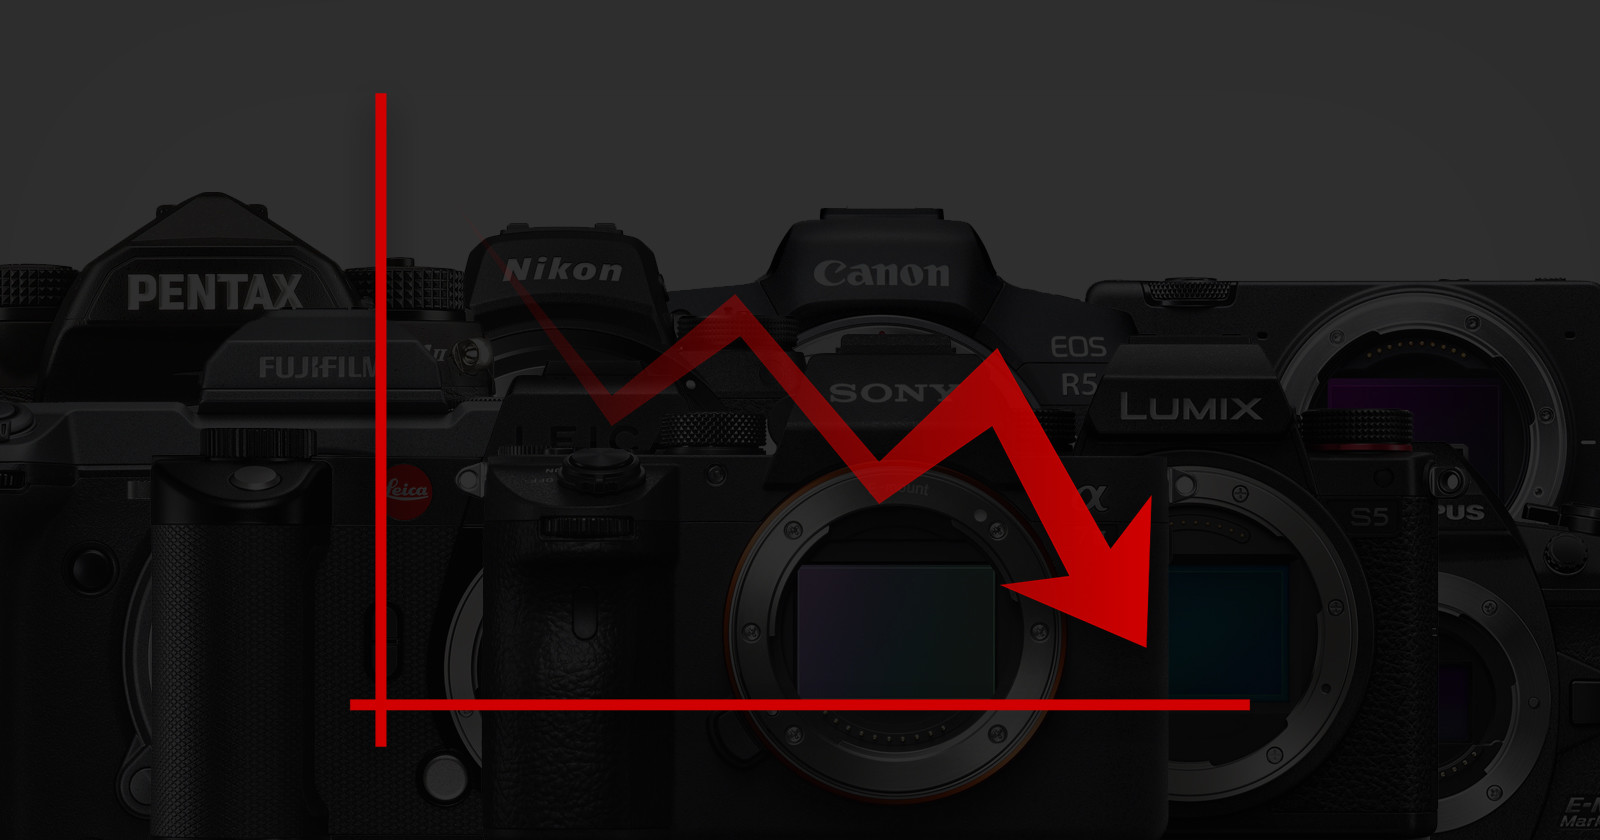 Camera Production Down as Much as 30% Over Last 2 Years: Report